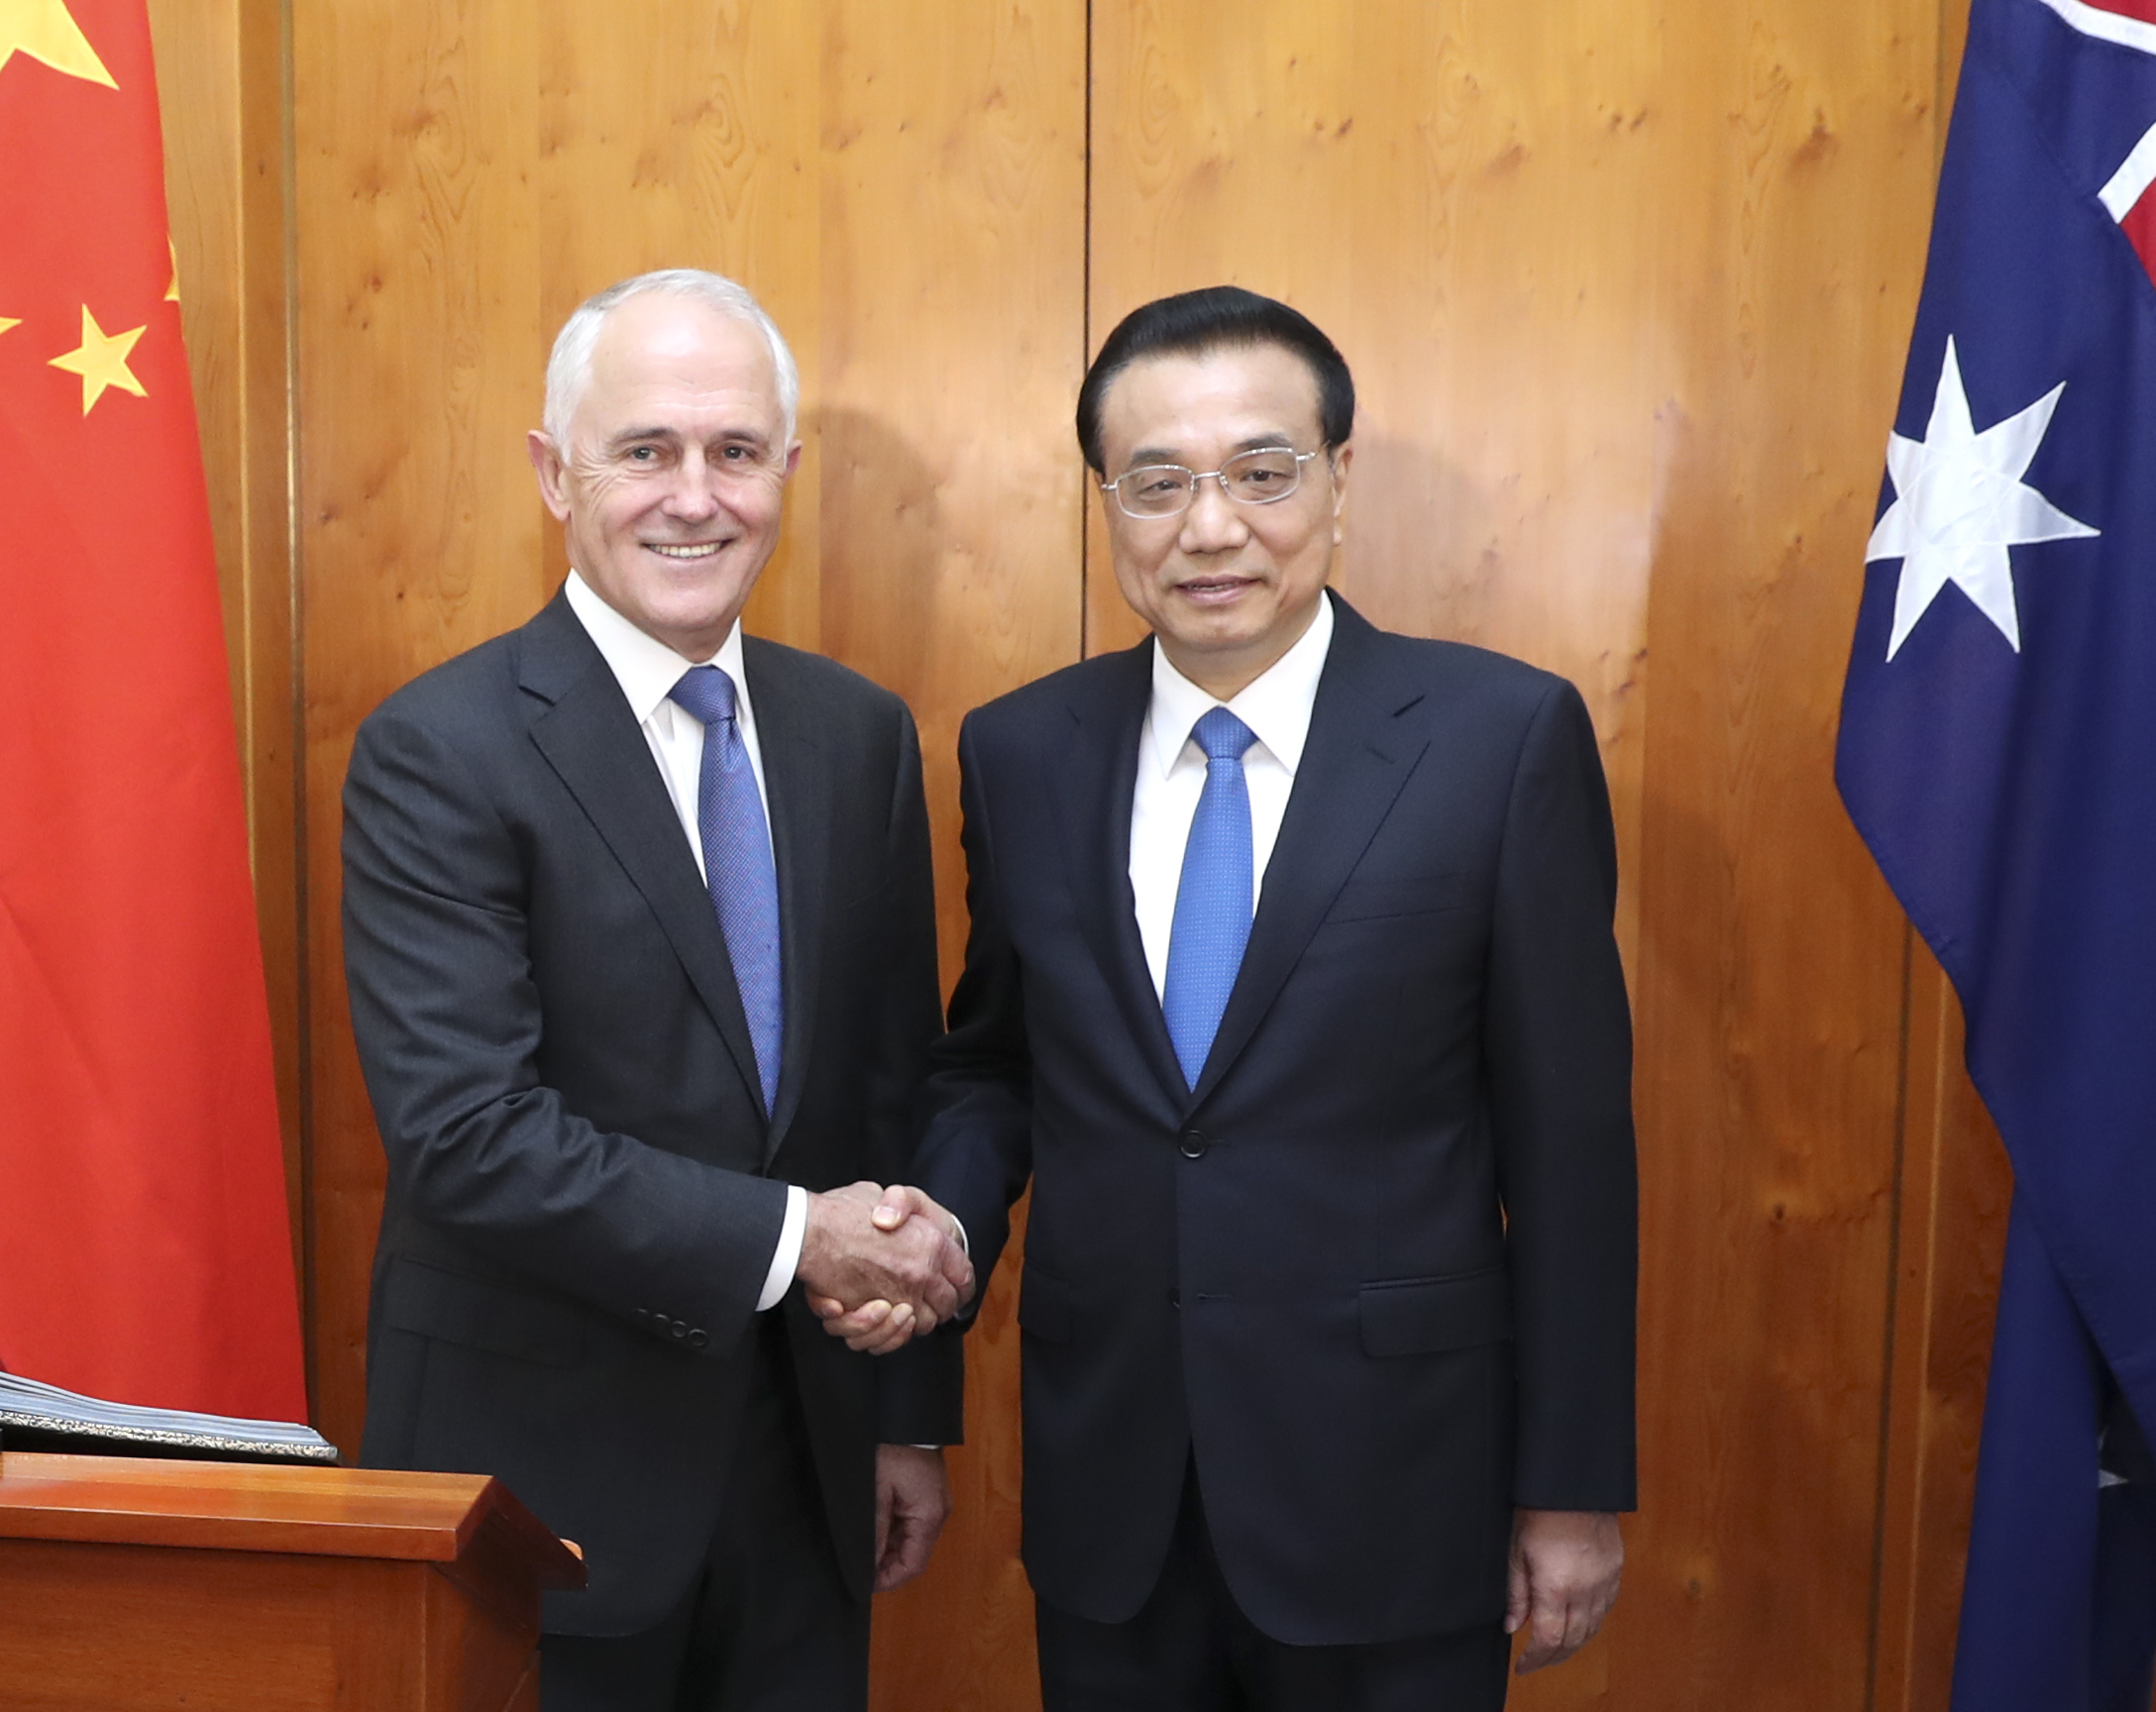 Chinese Premier Li Keqiang meets his Australian counterpart Malcolm Turnbull in Canberra, Australia, on Thursday, March 23, 2017. Li said during the meeting that China will expand the scope of opening-up, and promote trade and investment liberalization and facilitation as well as uphold the current global trading system. [Photo: gov.cn]